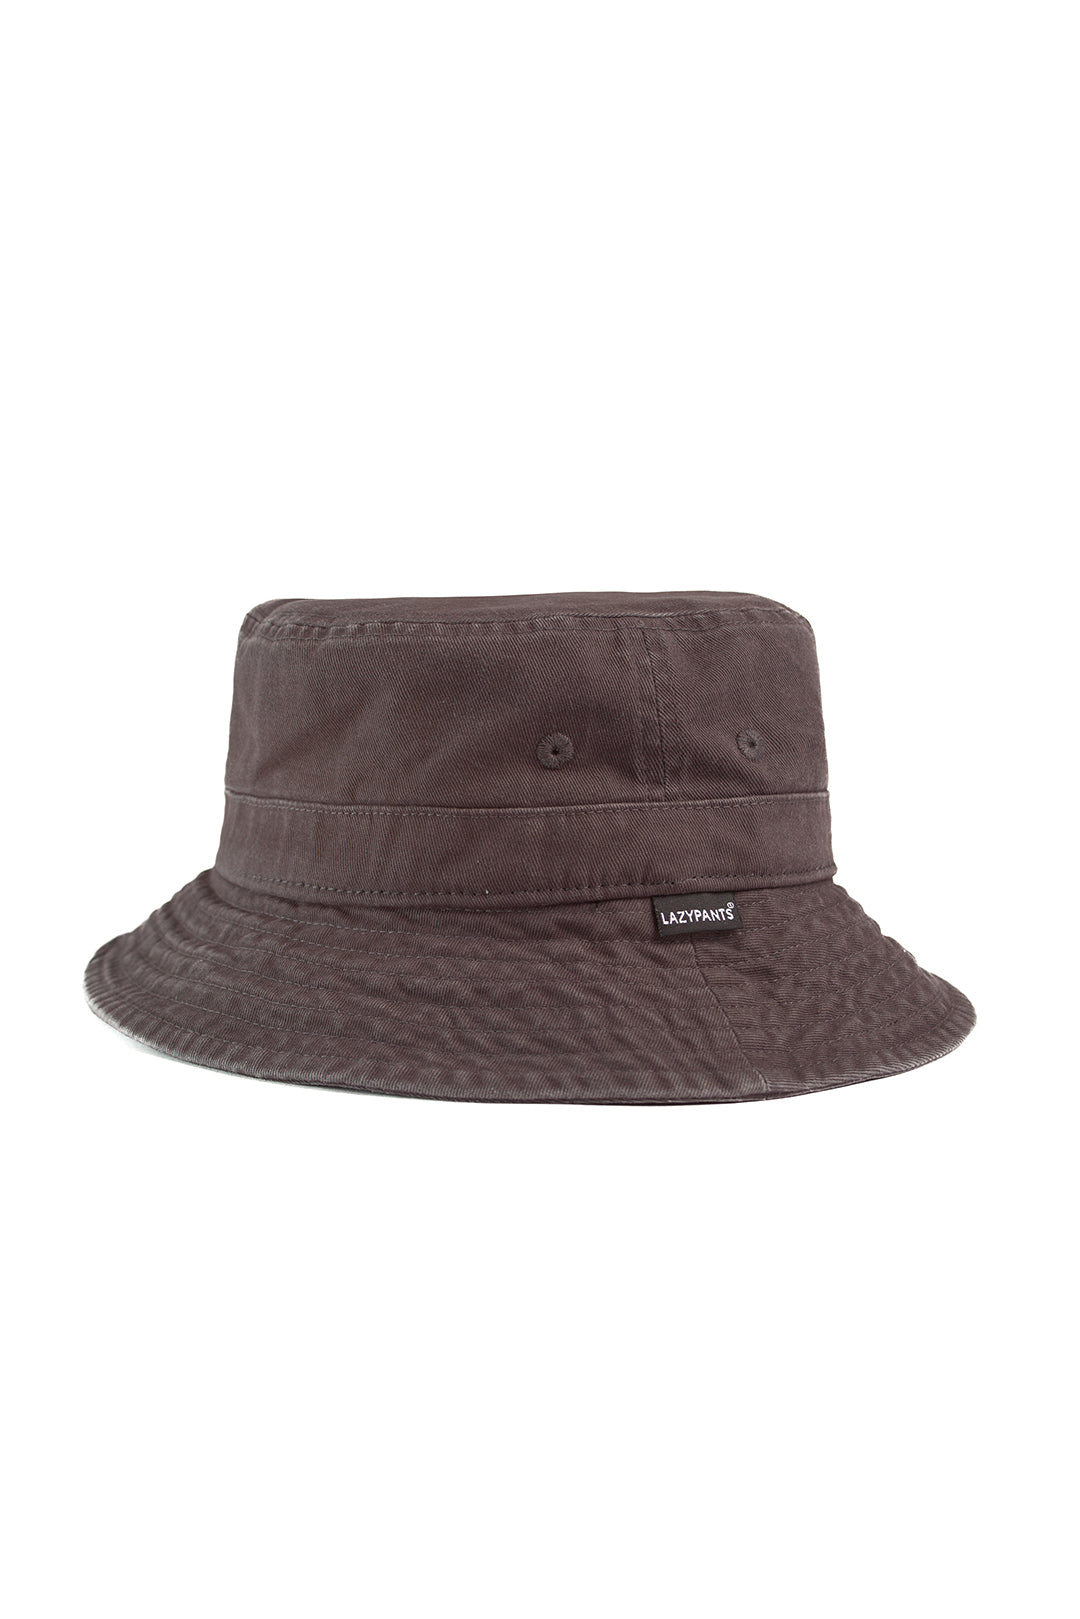 Washed cotton twill dad’s bucket hat in charcoal